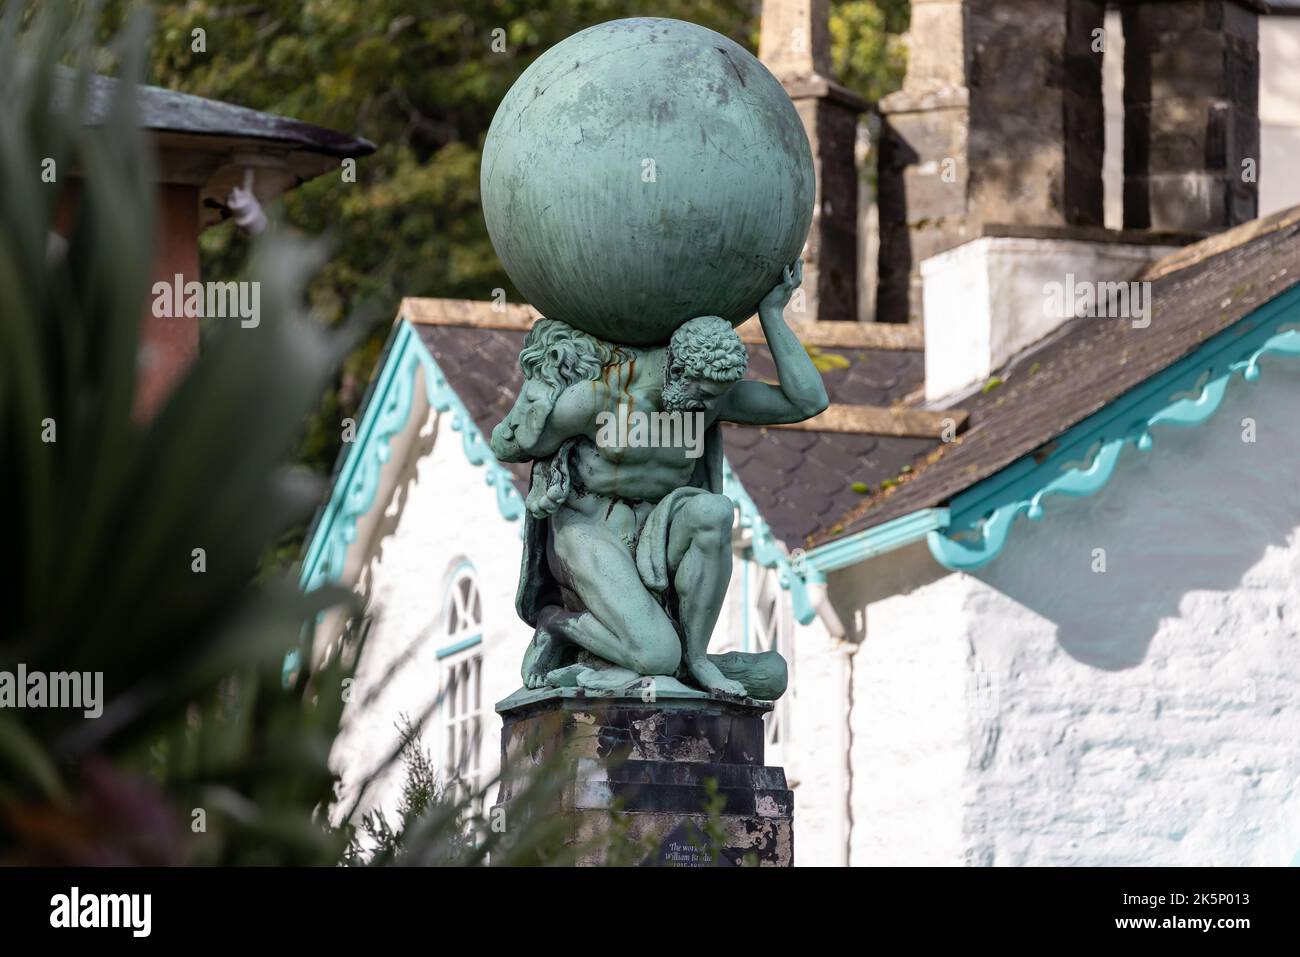 Statue of hercules carrying the world on his shoulders in Portmeirion, Gwnydd, North Wales on 3 Ocotber 2022 Stock Photo